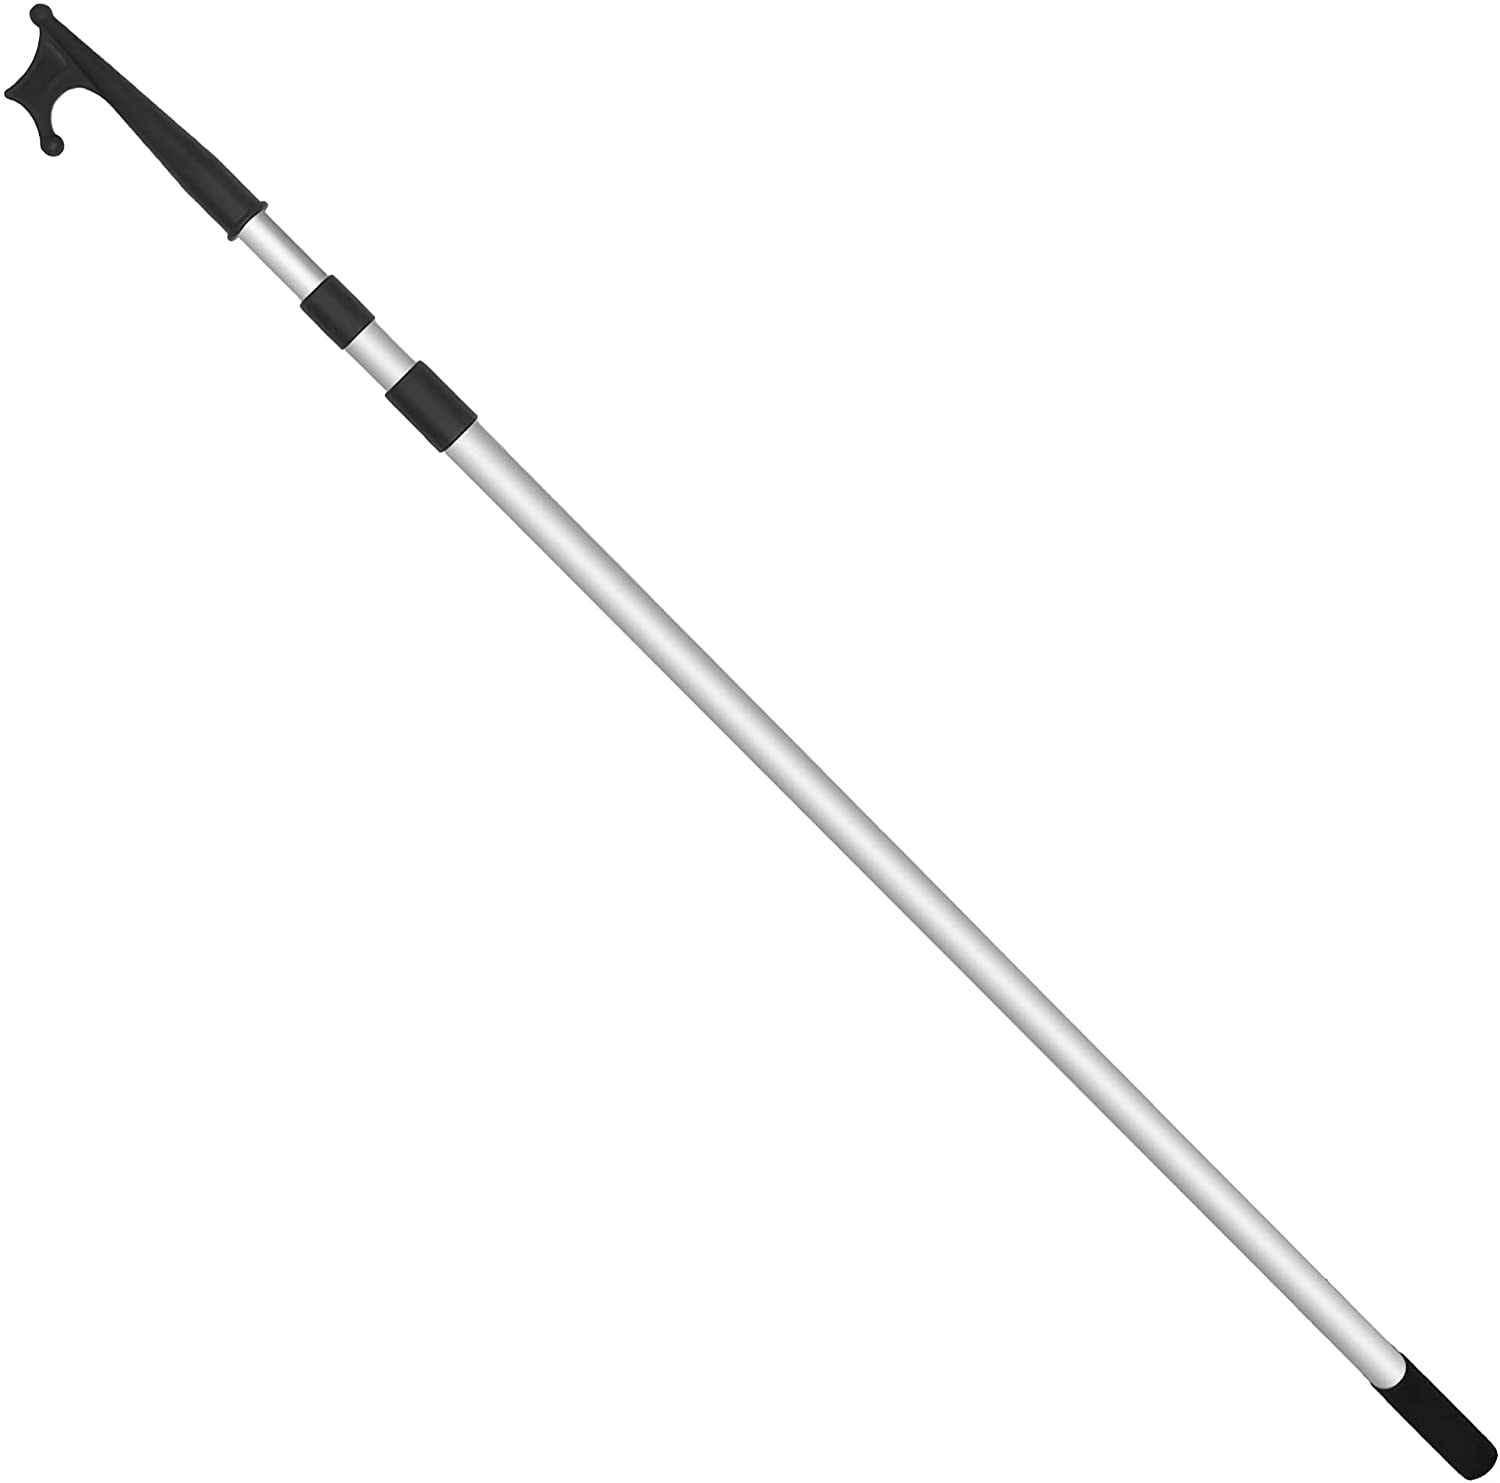 Telescoping Aluminum Boat Hook, Extends from 4-1/2 ft / 56 in (142cm) to 12  ft / 144 in (366cm), Anodized Aluminum shaft